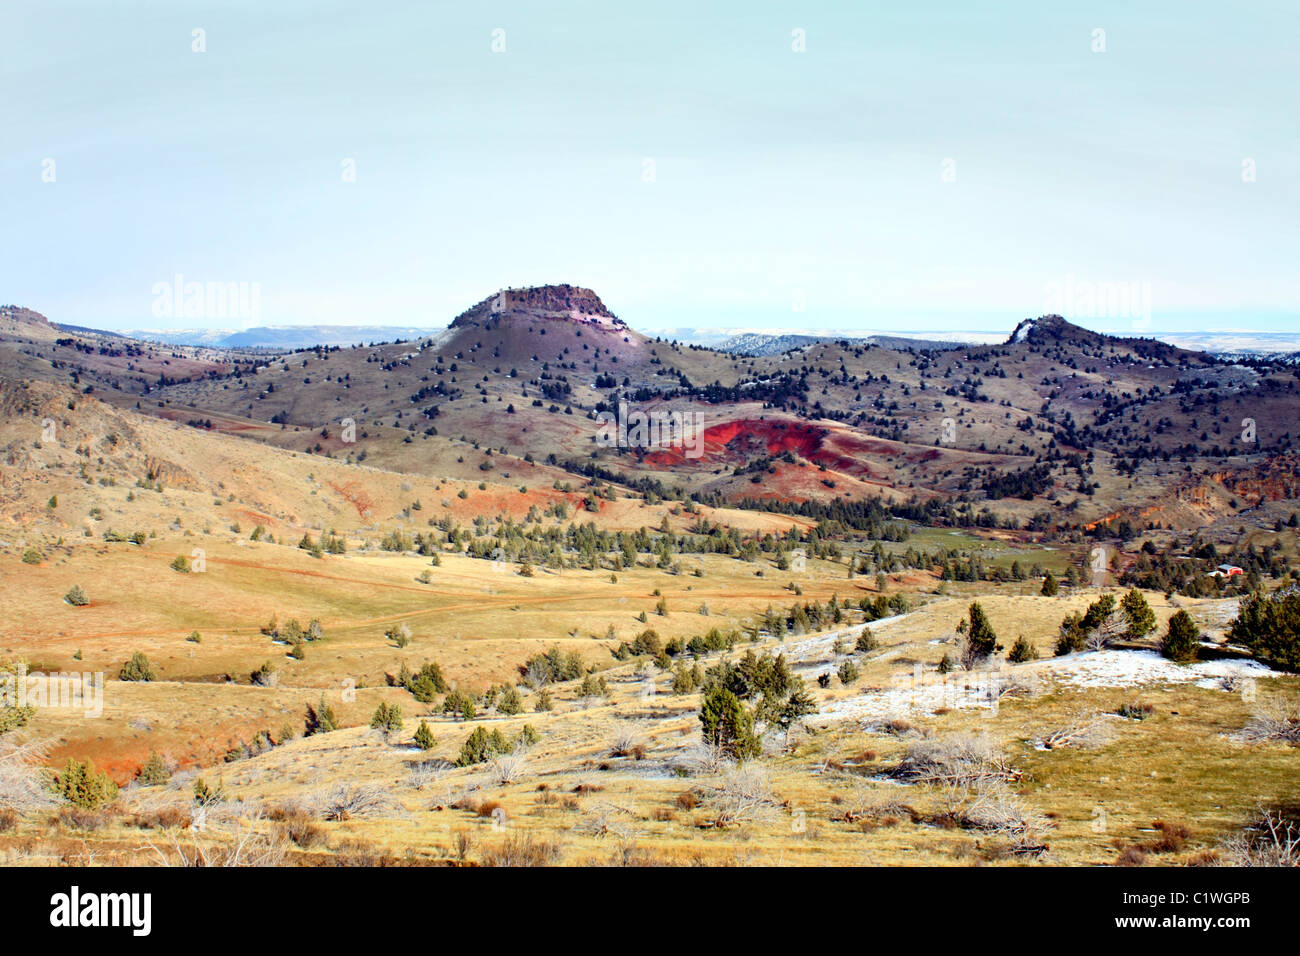 40,600.03259 High desert valley and rock hills/mounds/buttes with red to reddish brown soil.  Juniper trees, winter, but almost no snow. Stock Photo